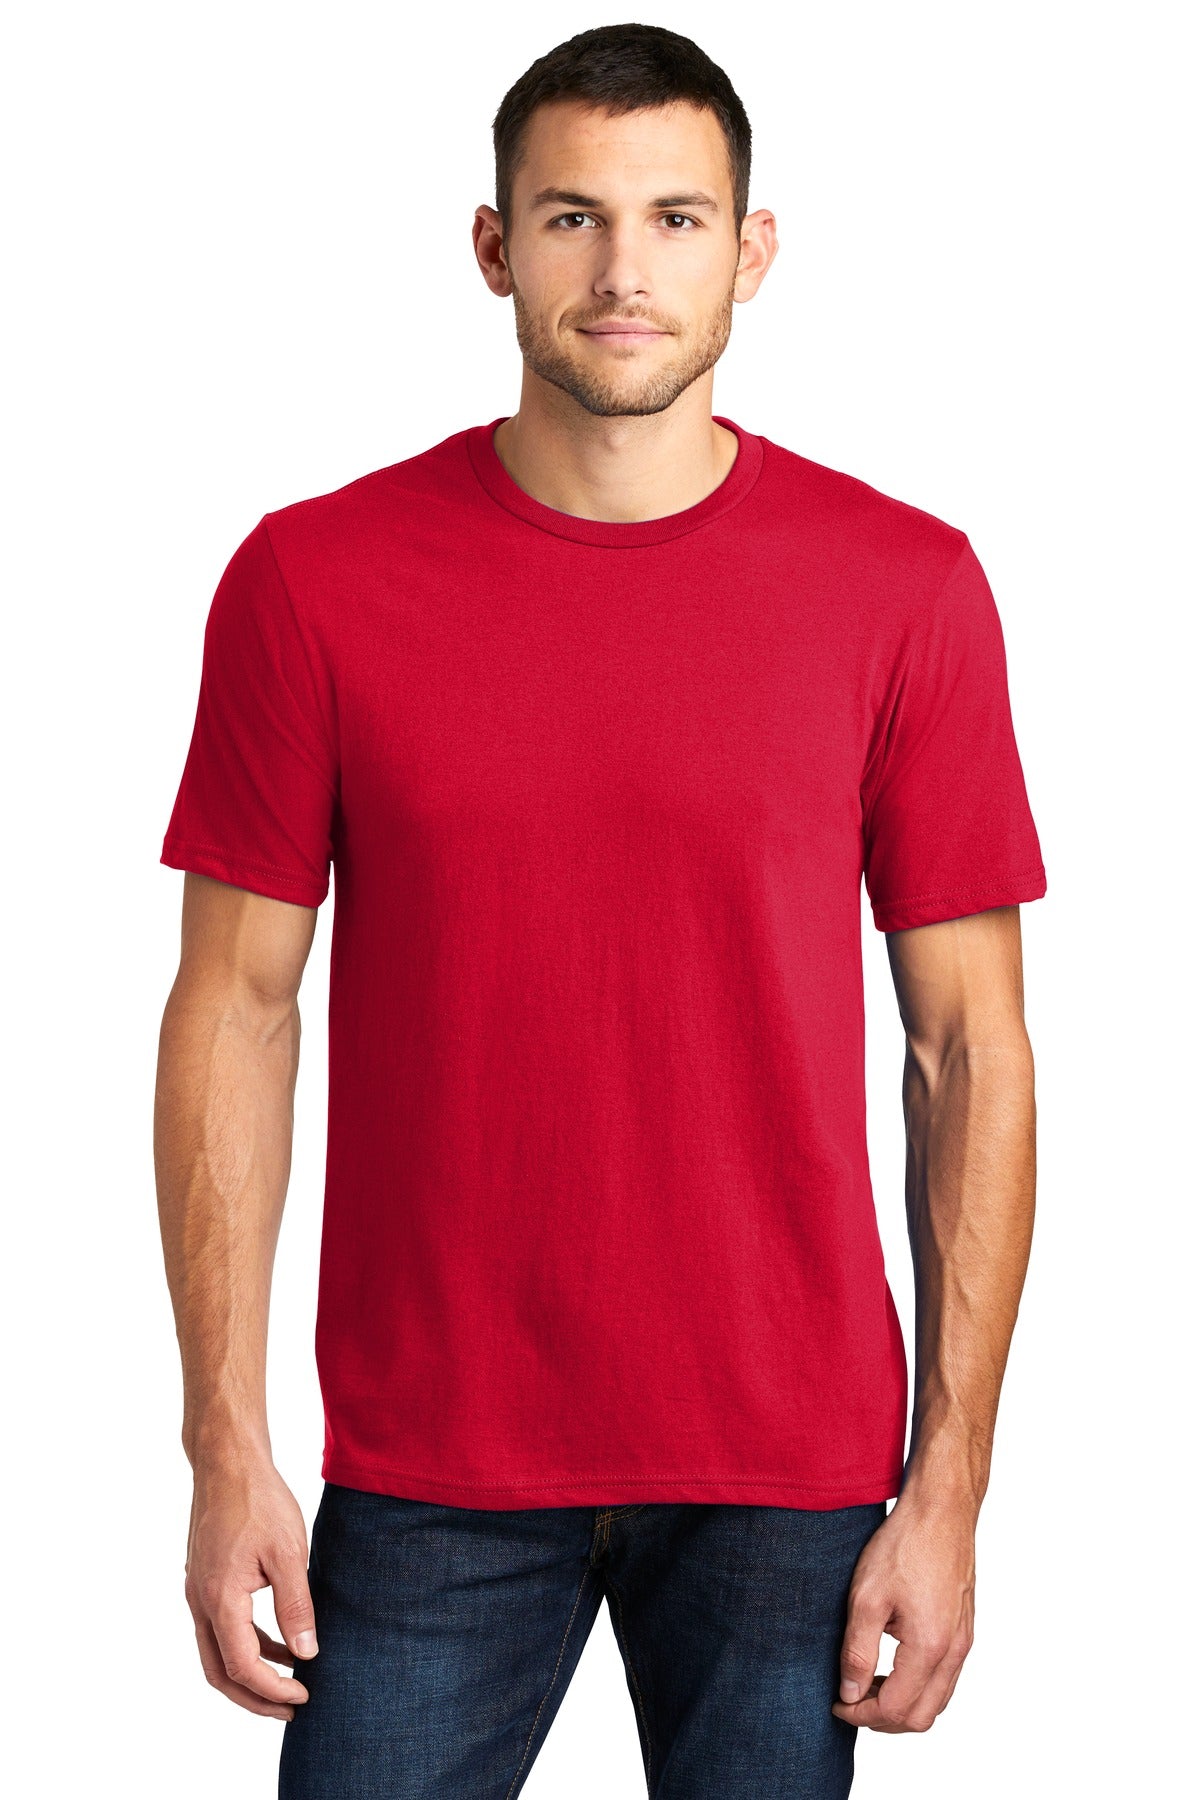 District® Very Important Tee®. DT6000 [Classic Red] - DFW Impression